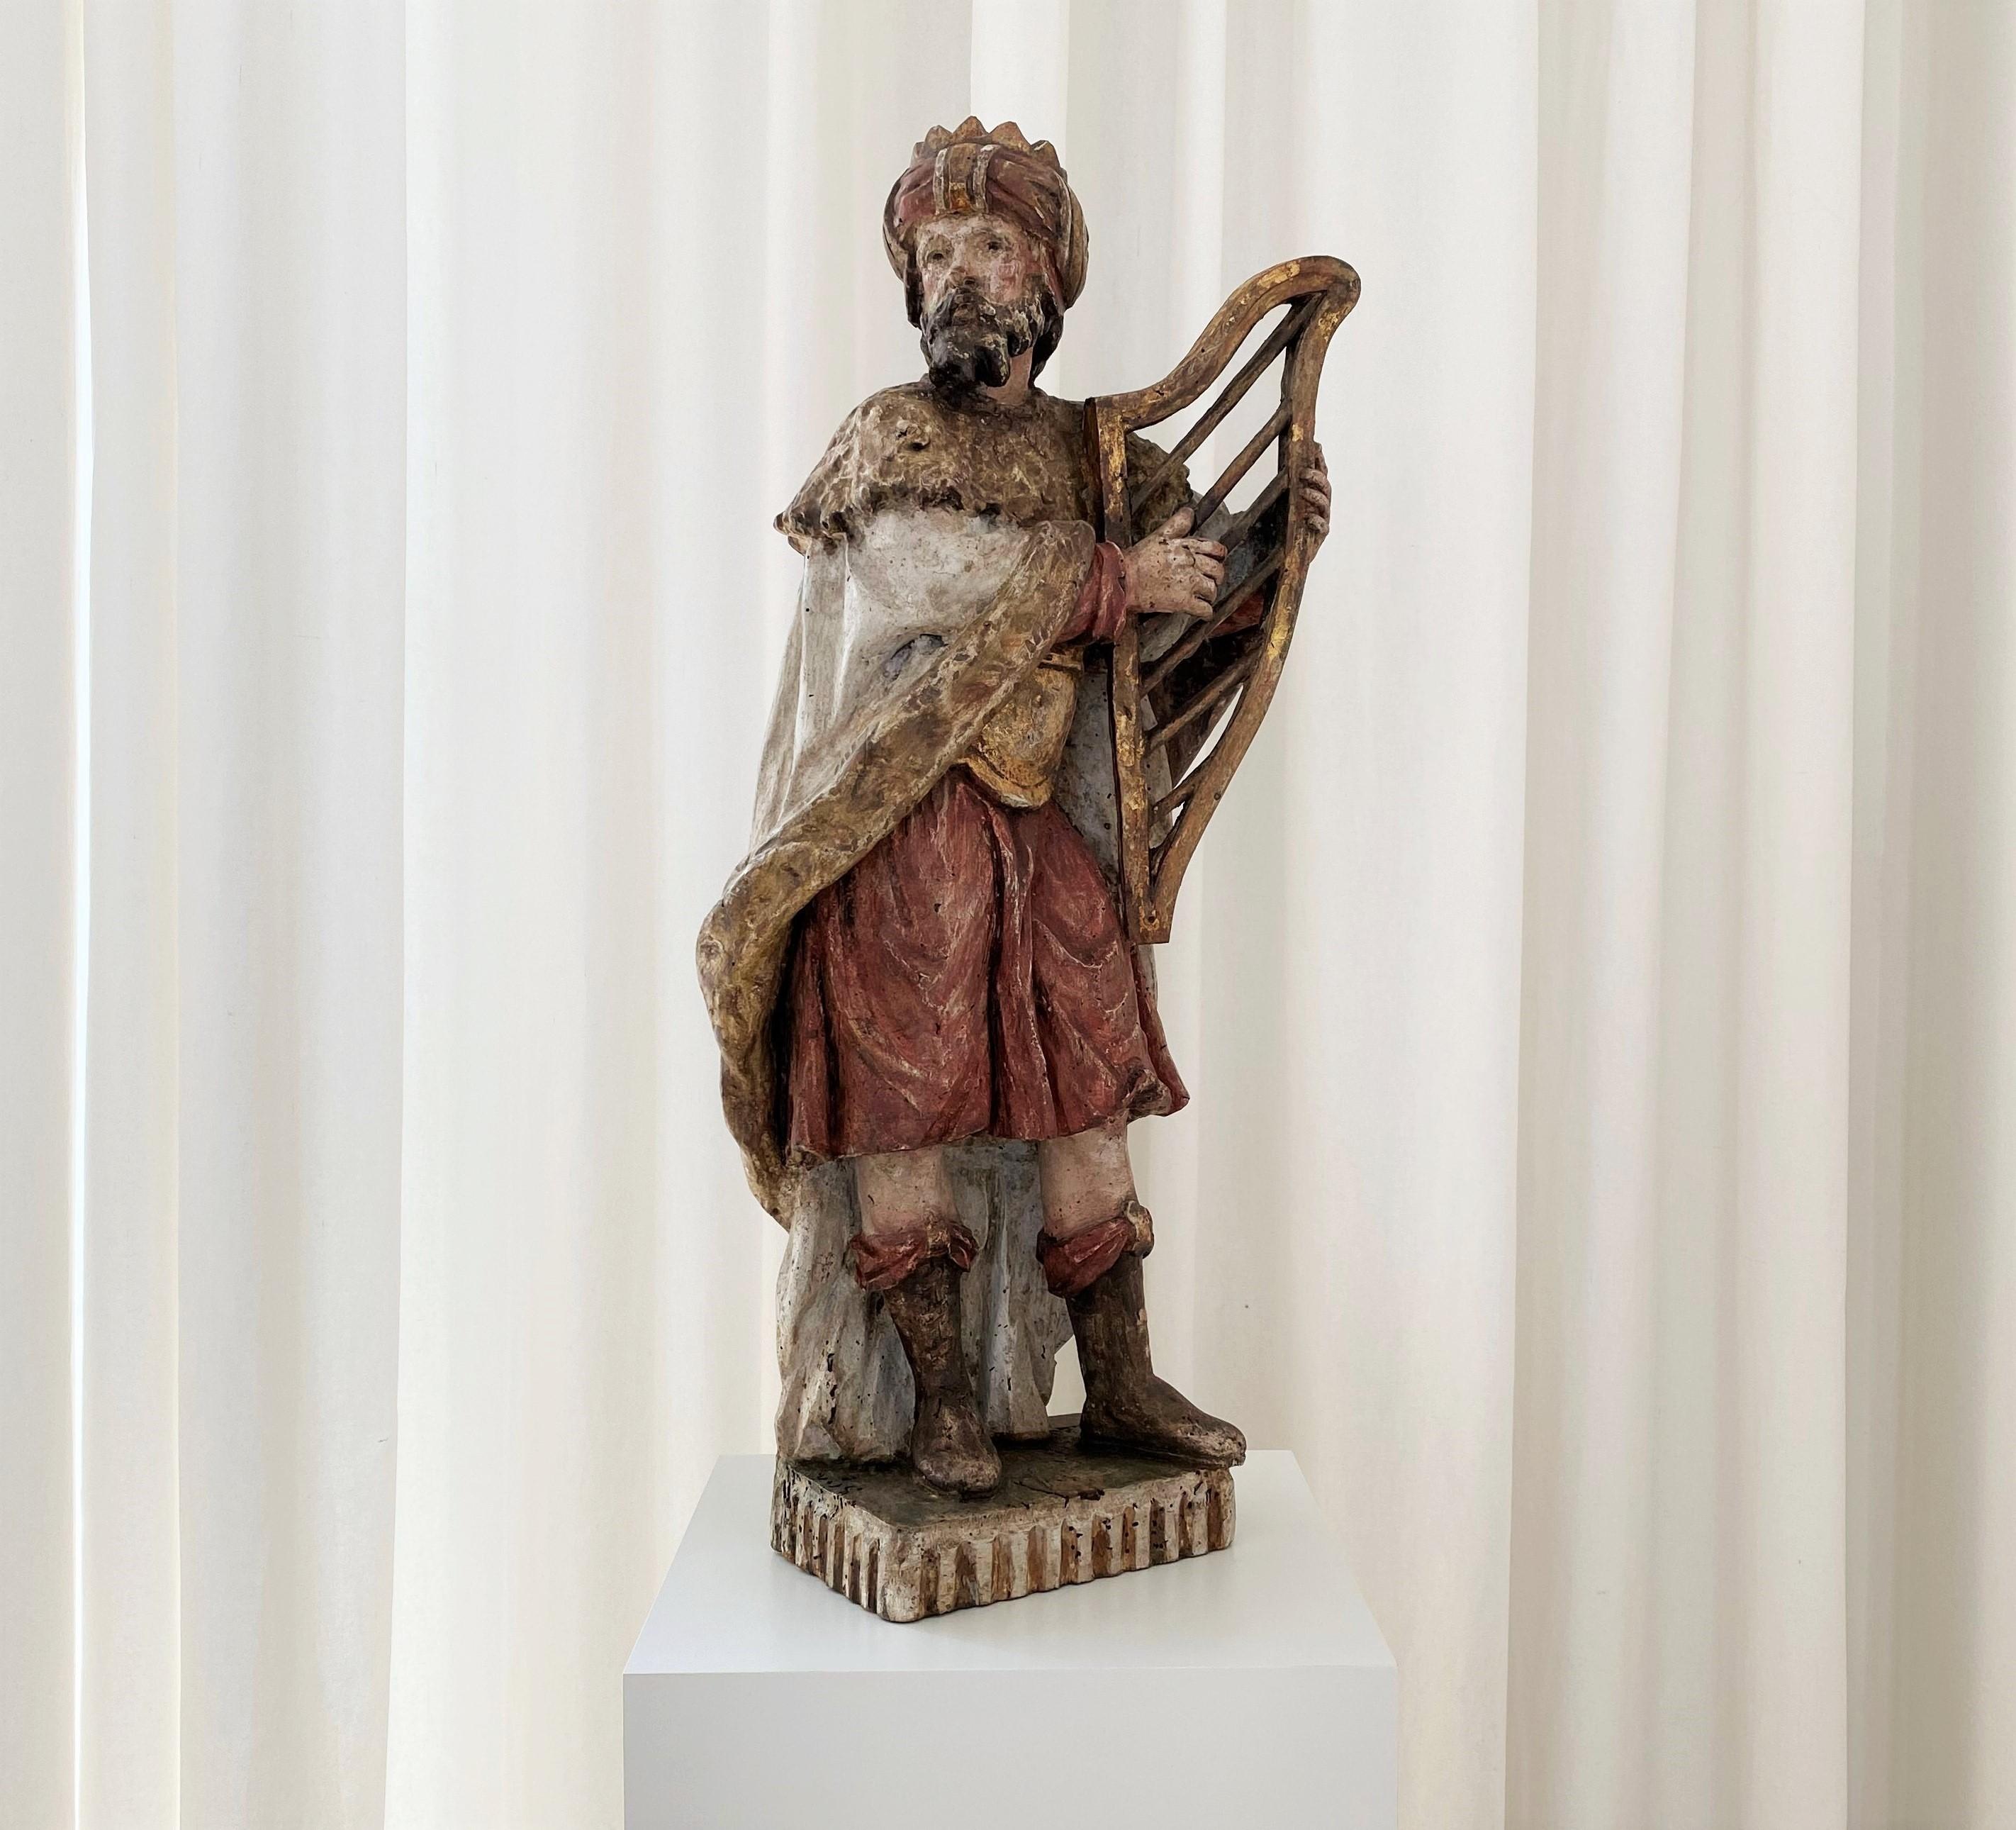 Flanders 17th century, King David playing the harp, sculpture in polychromed wood, beautiful patina.